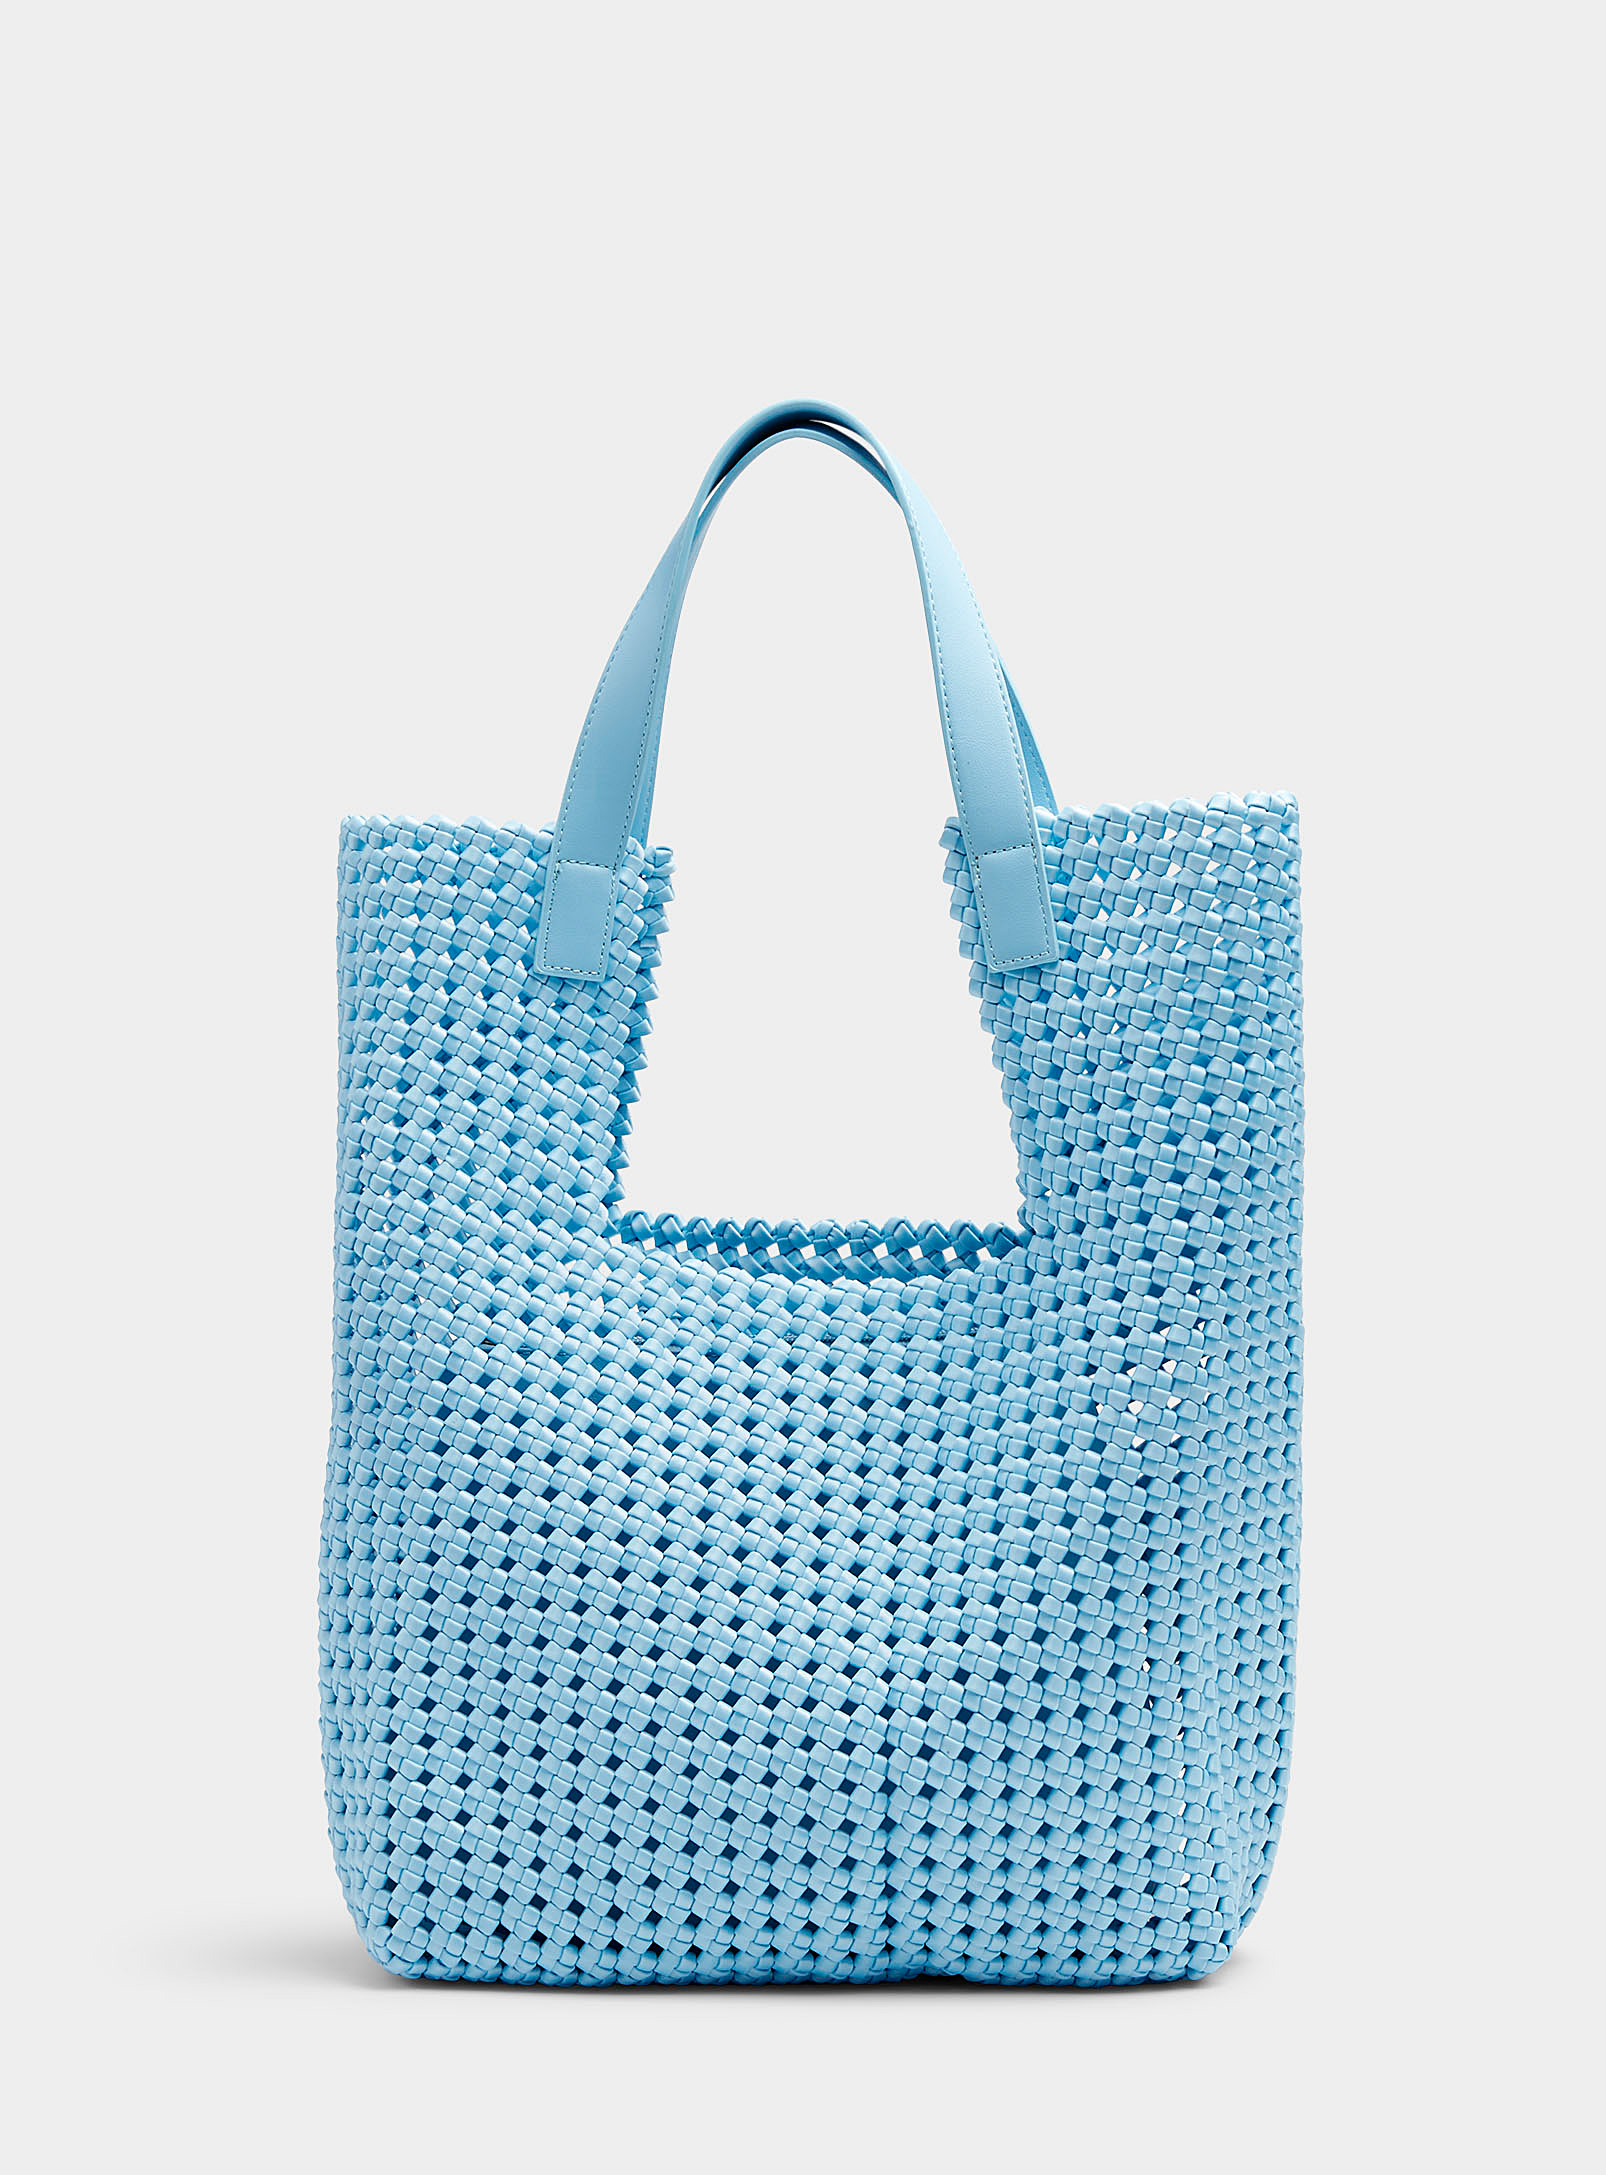 Melie Bianco Rihanna Openwork Braided Large Tote In Patterned Blue